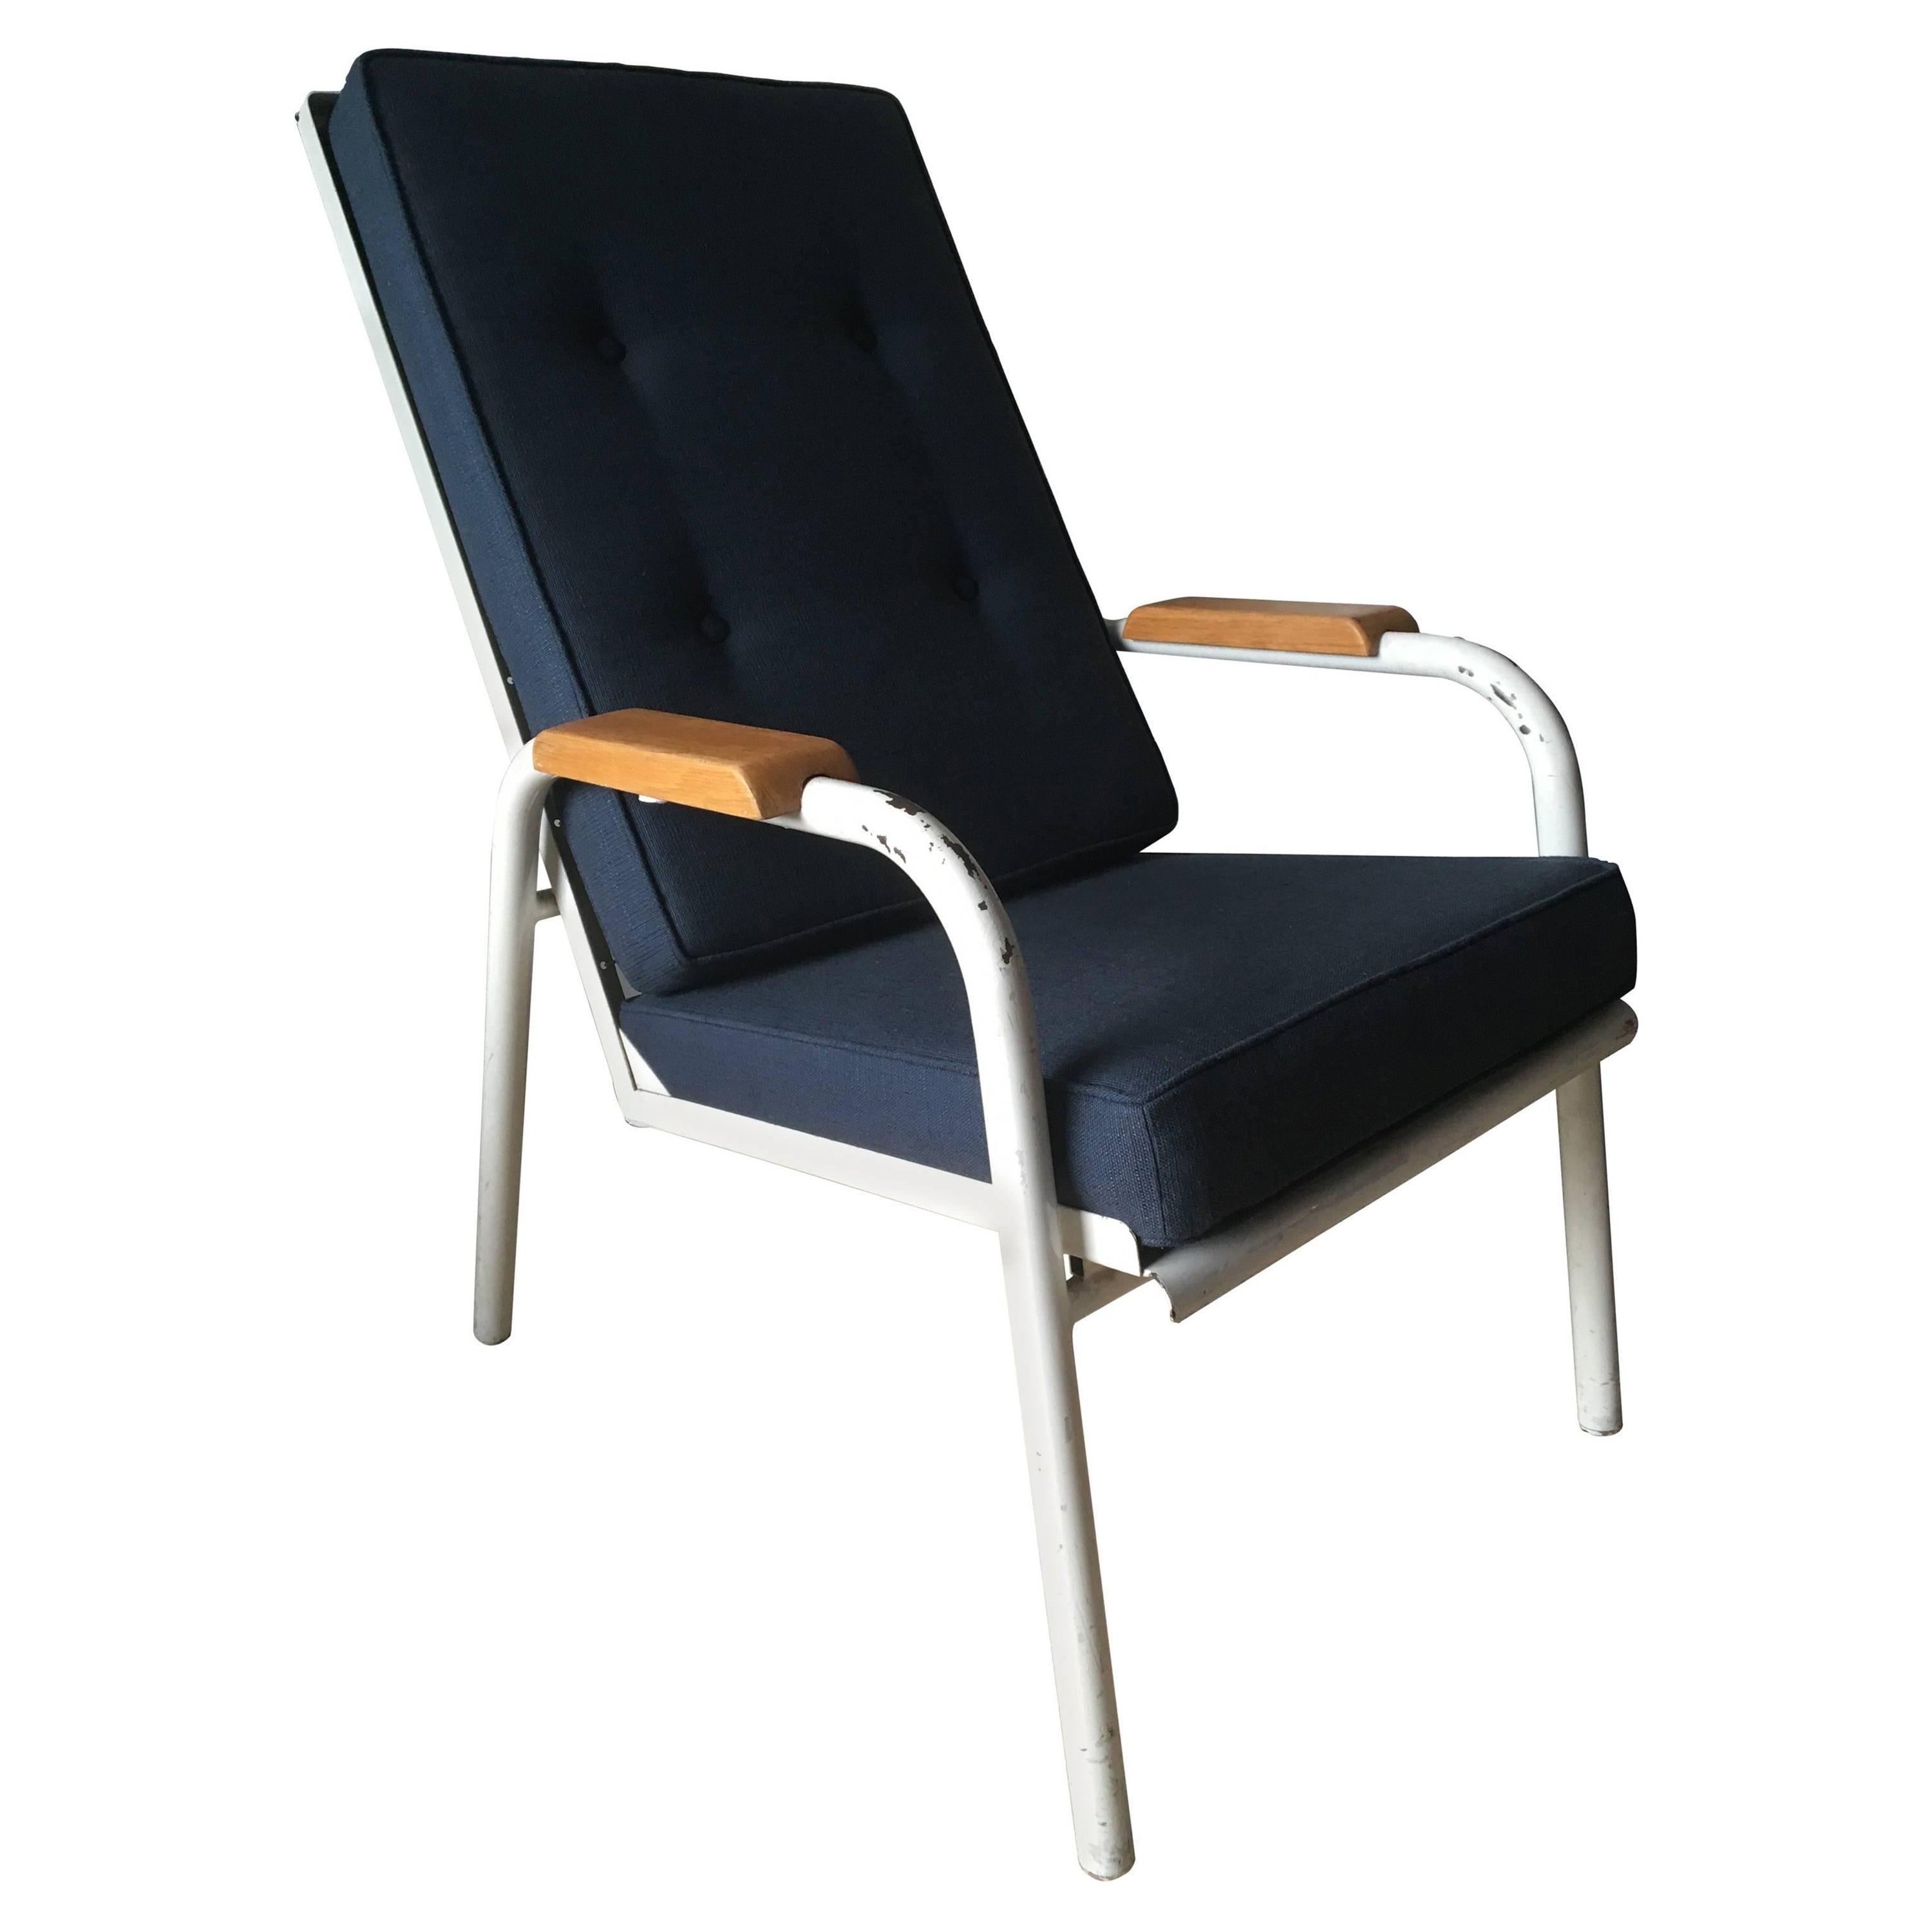 Jean Prouve Lounge Chair, 1949 For Sale